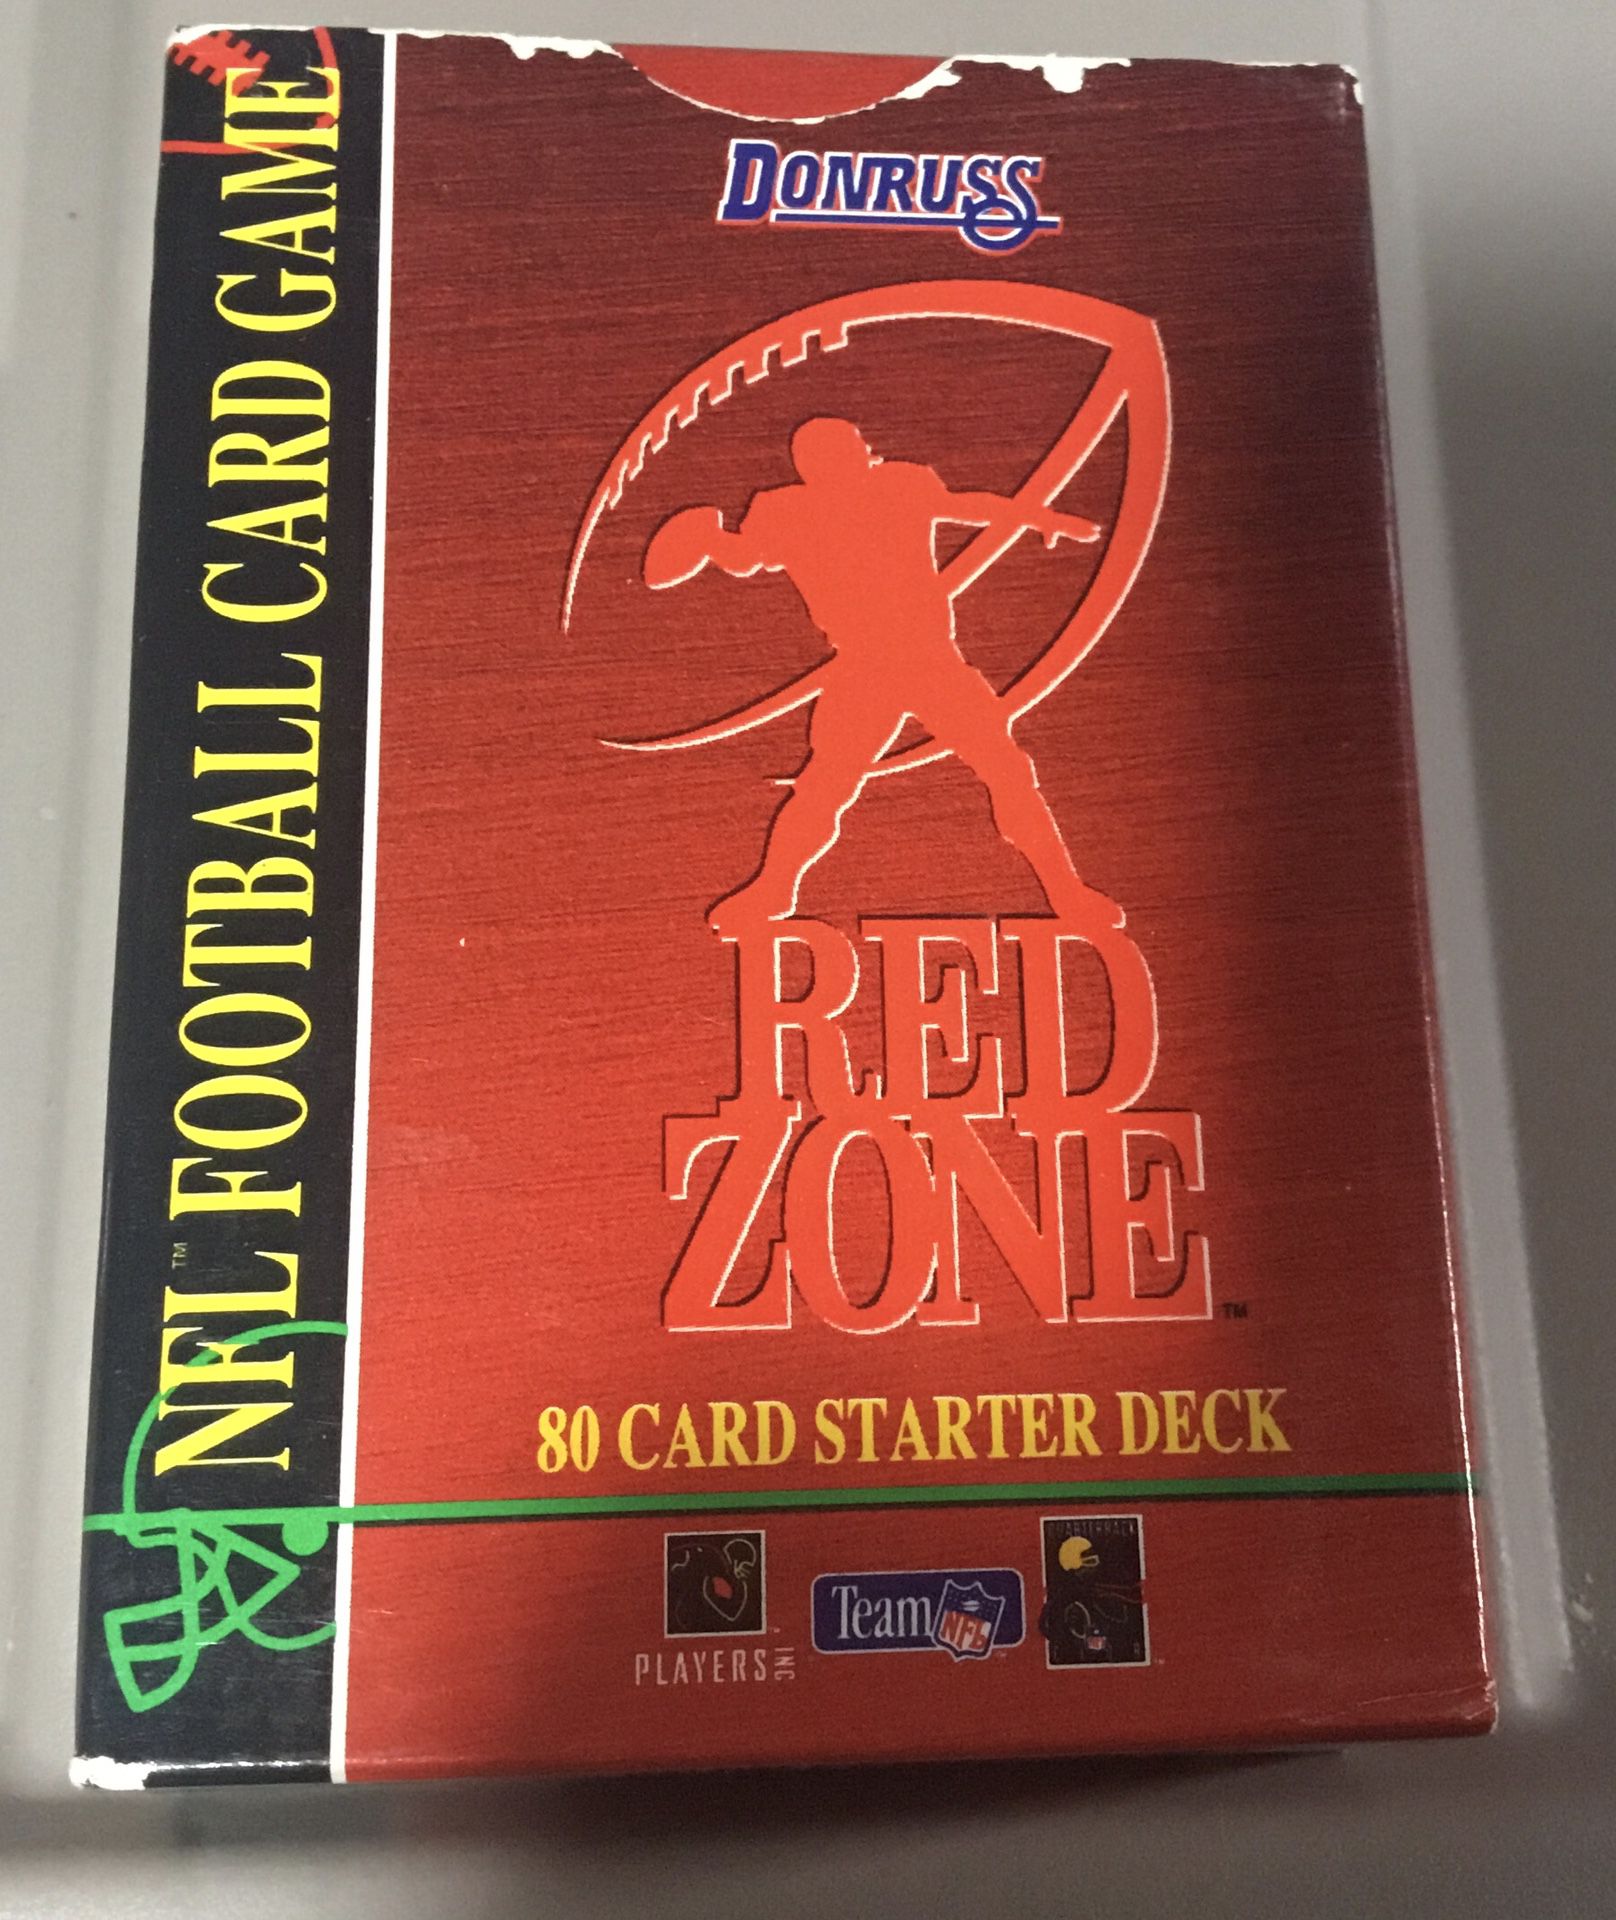 Donross Red Zone Card Game